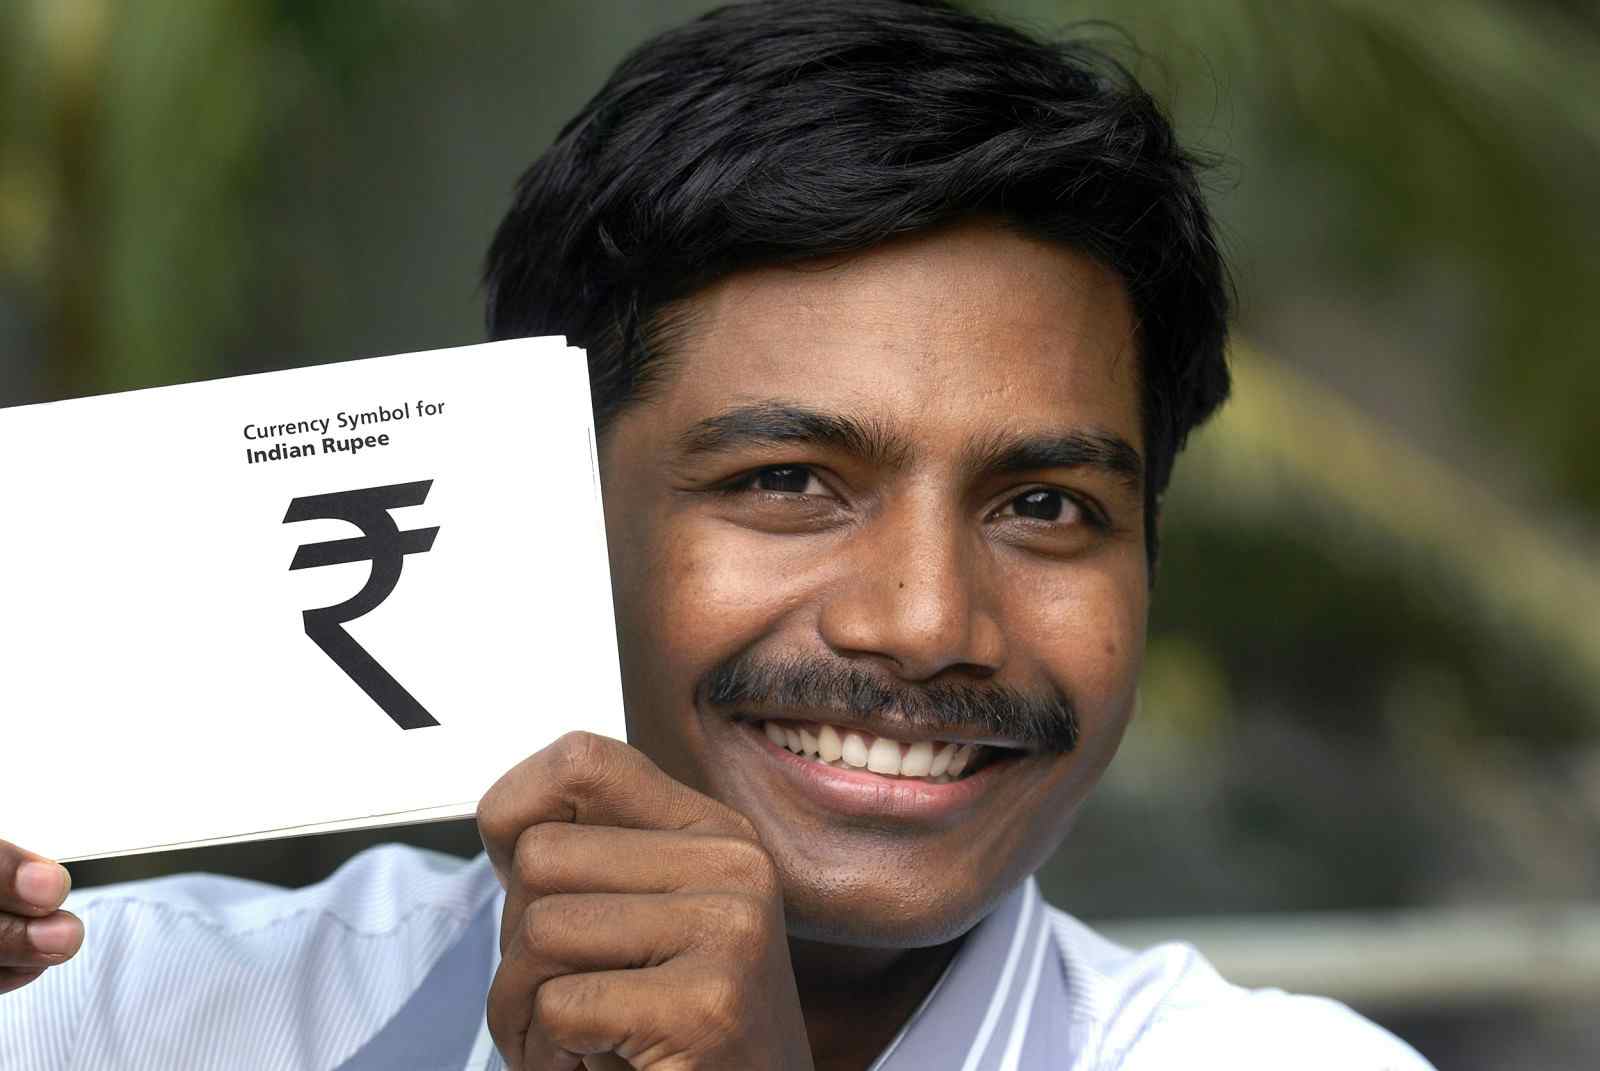 Mumbai, India July 15, 2010: D Udaya Kumar, IIT post-graduate, whose design has been approved as the symbol of the Indian rupee, photographed at IIT Bombay campus. (Abhijit Bhatlekar/Mint via Getty Images)